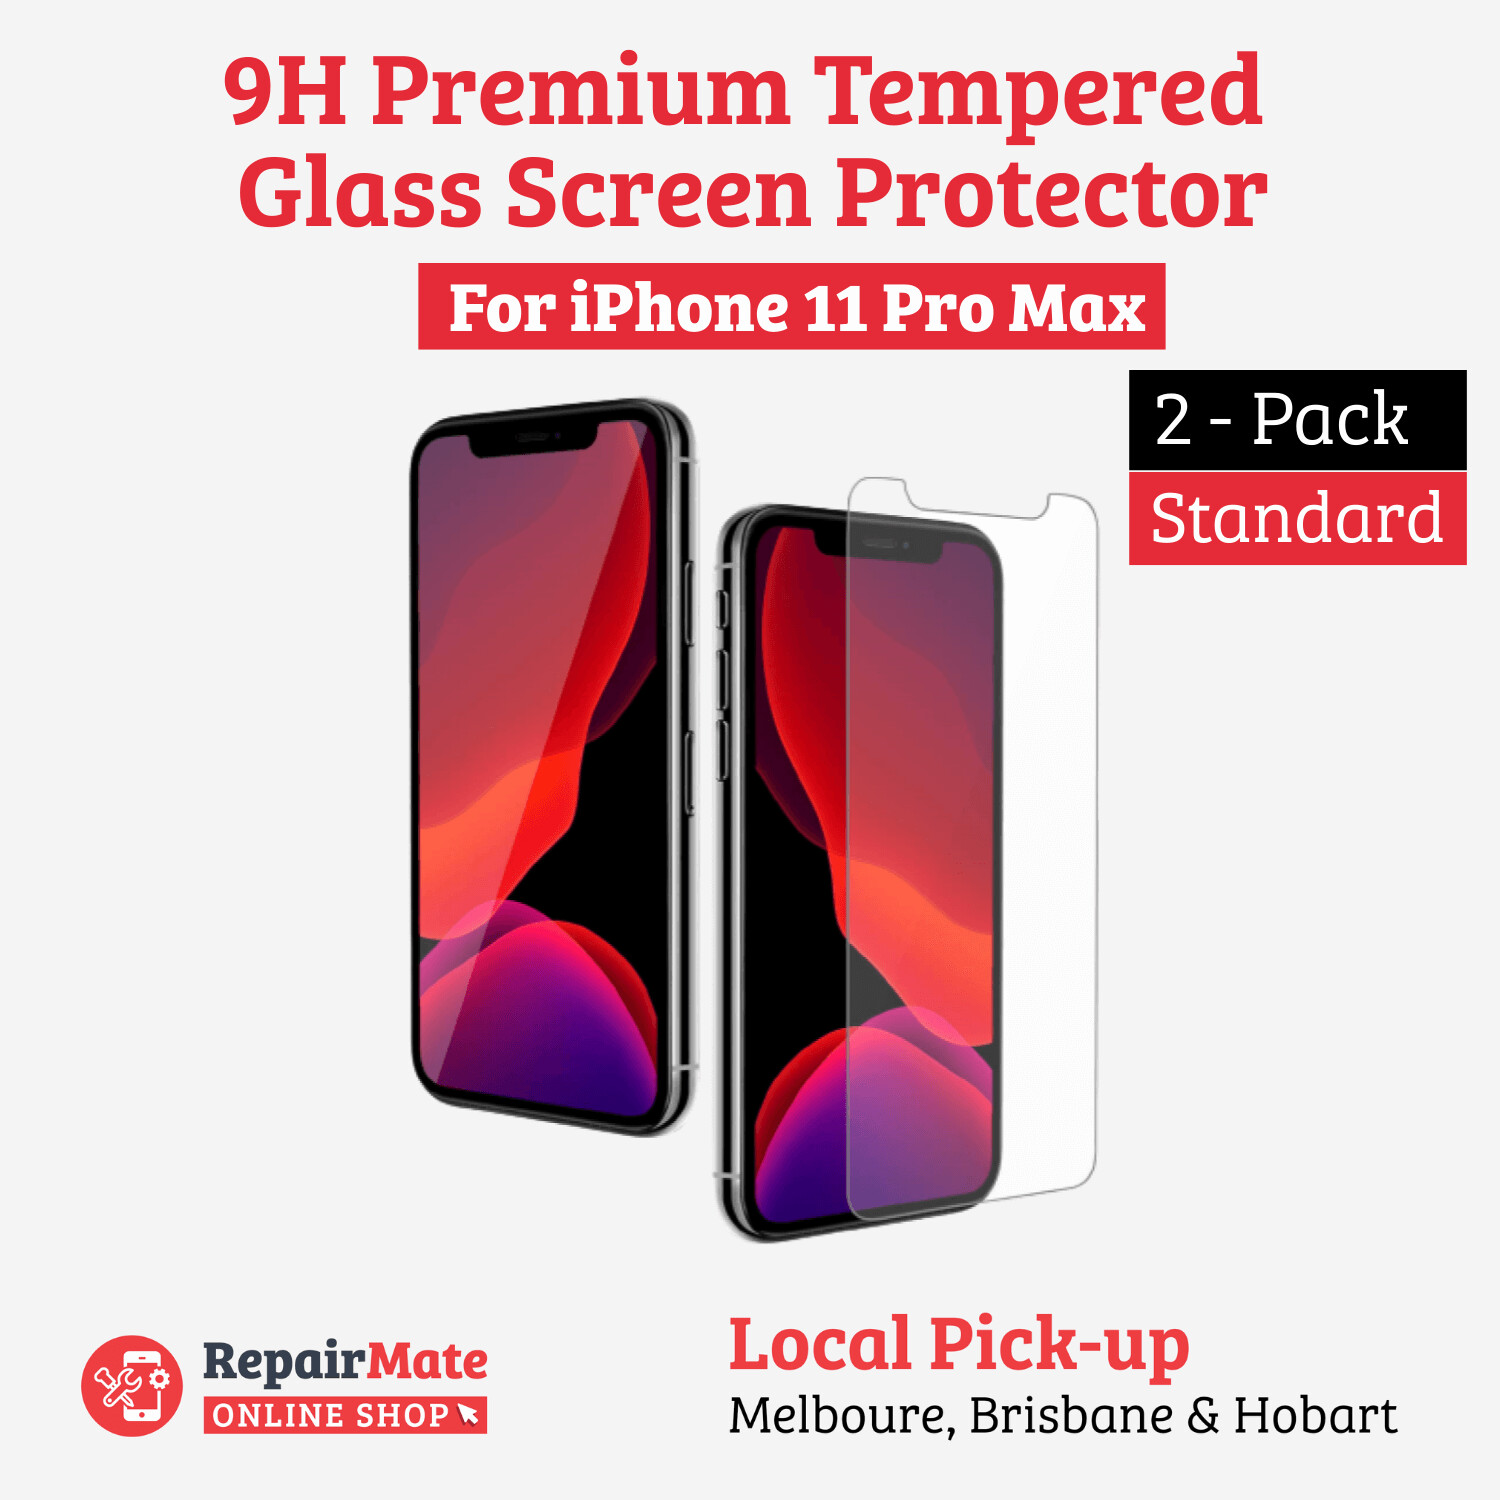 iPhone 11 Pro Max 9H Premium Tempered Glass Screen Protector [2 Pack]